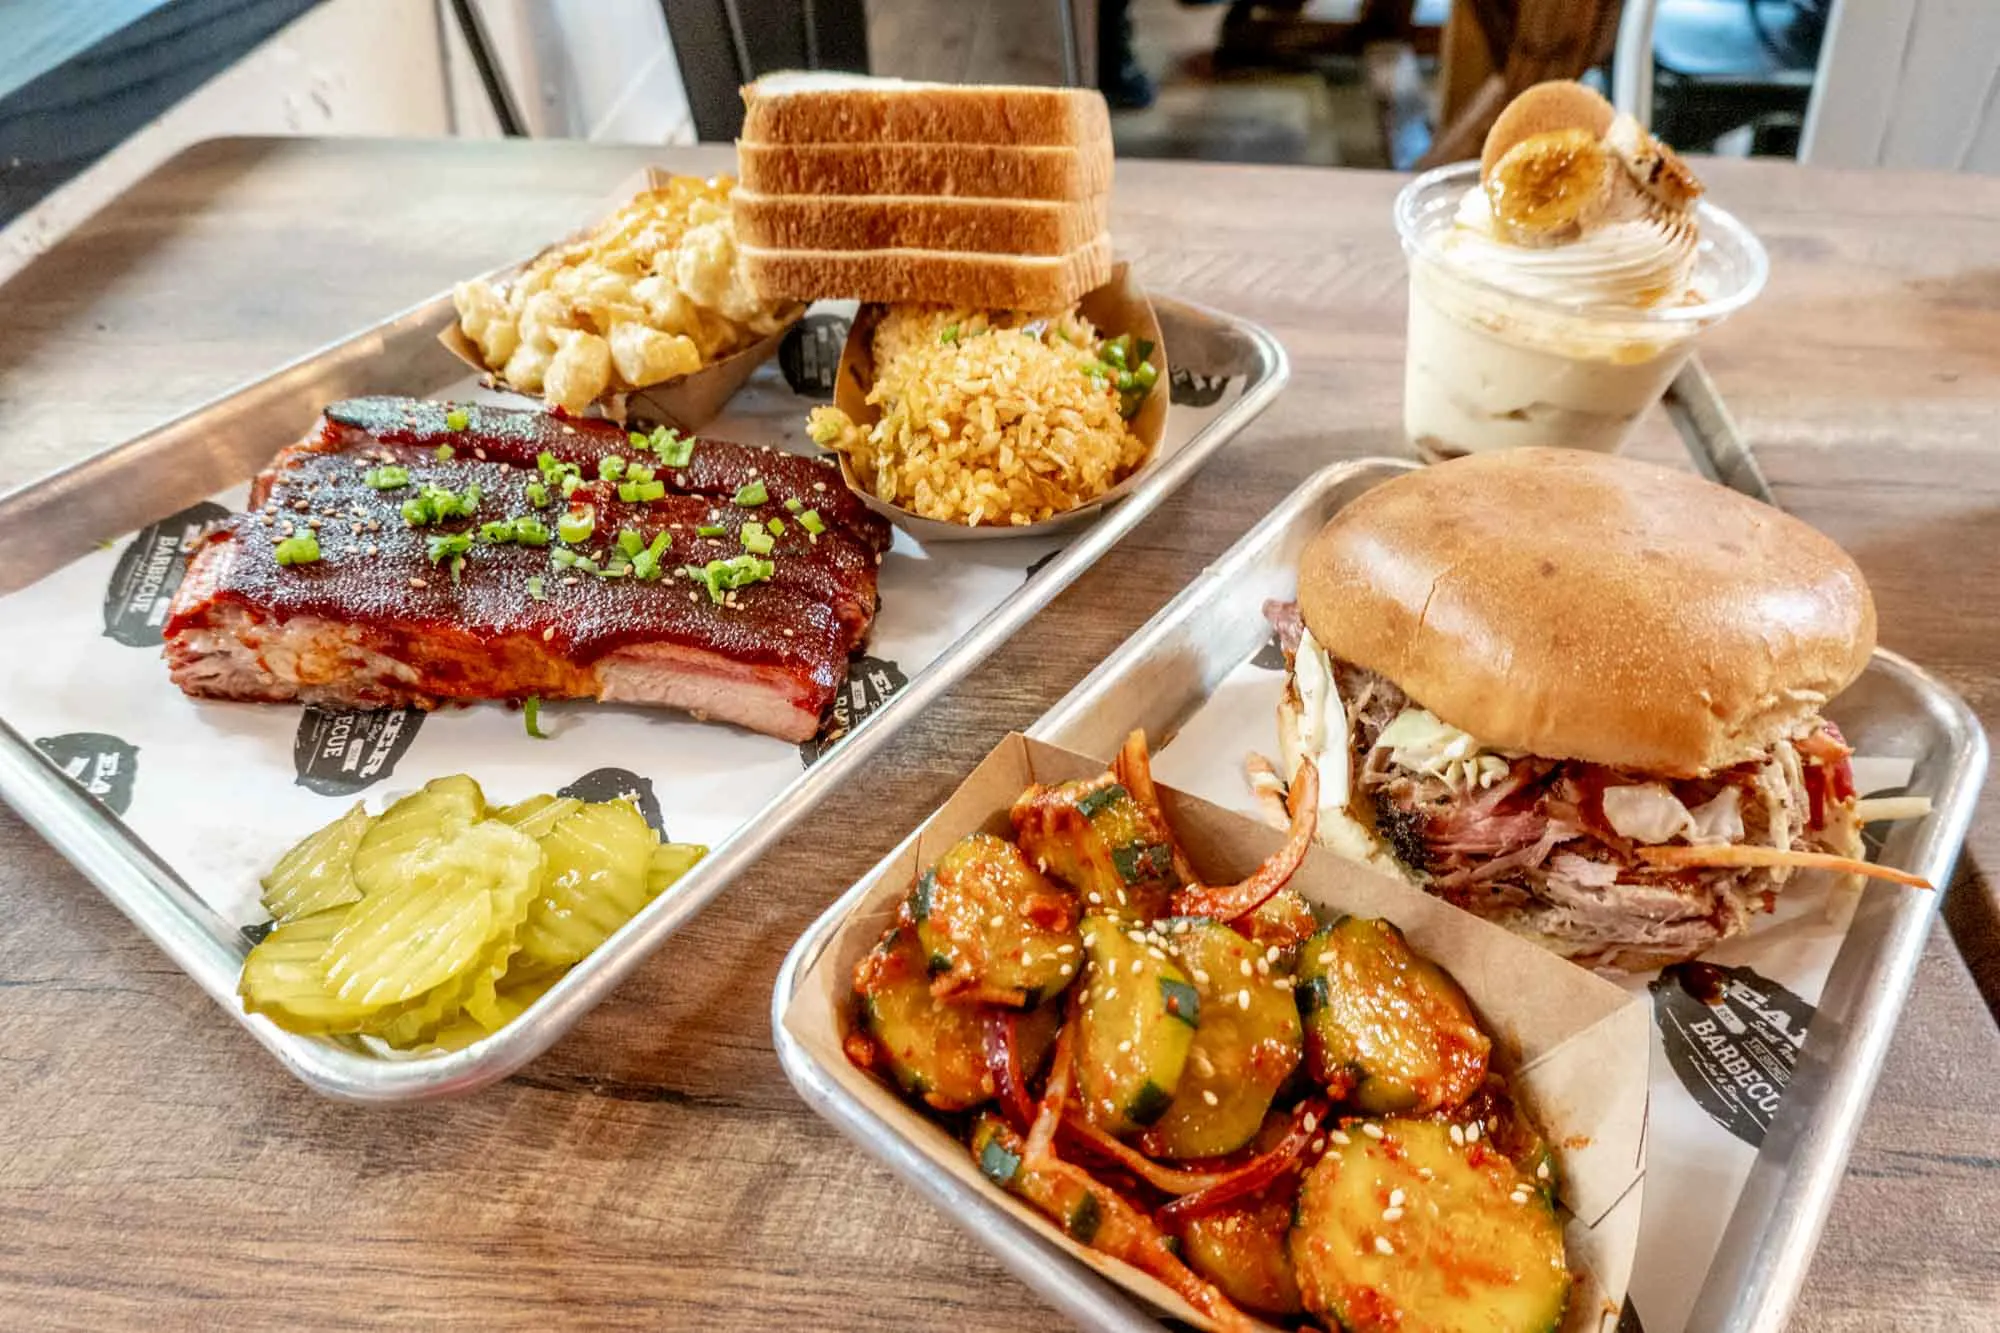 Ribs, pulled pork sandwich, pickles, and other food on table in a BBQ restaurant